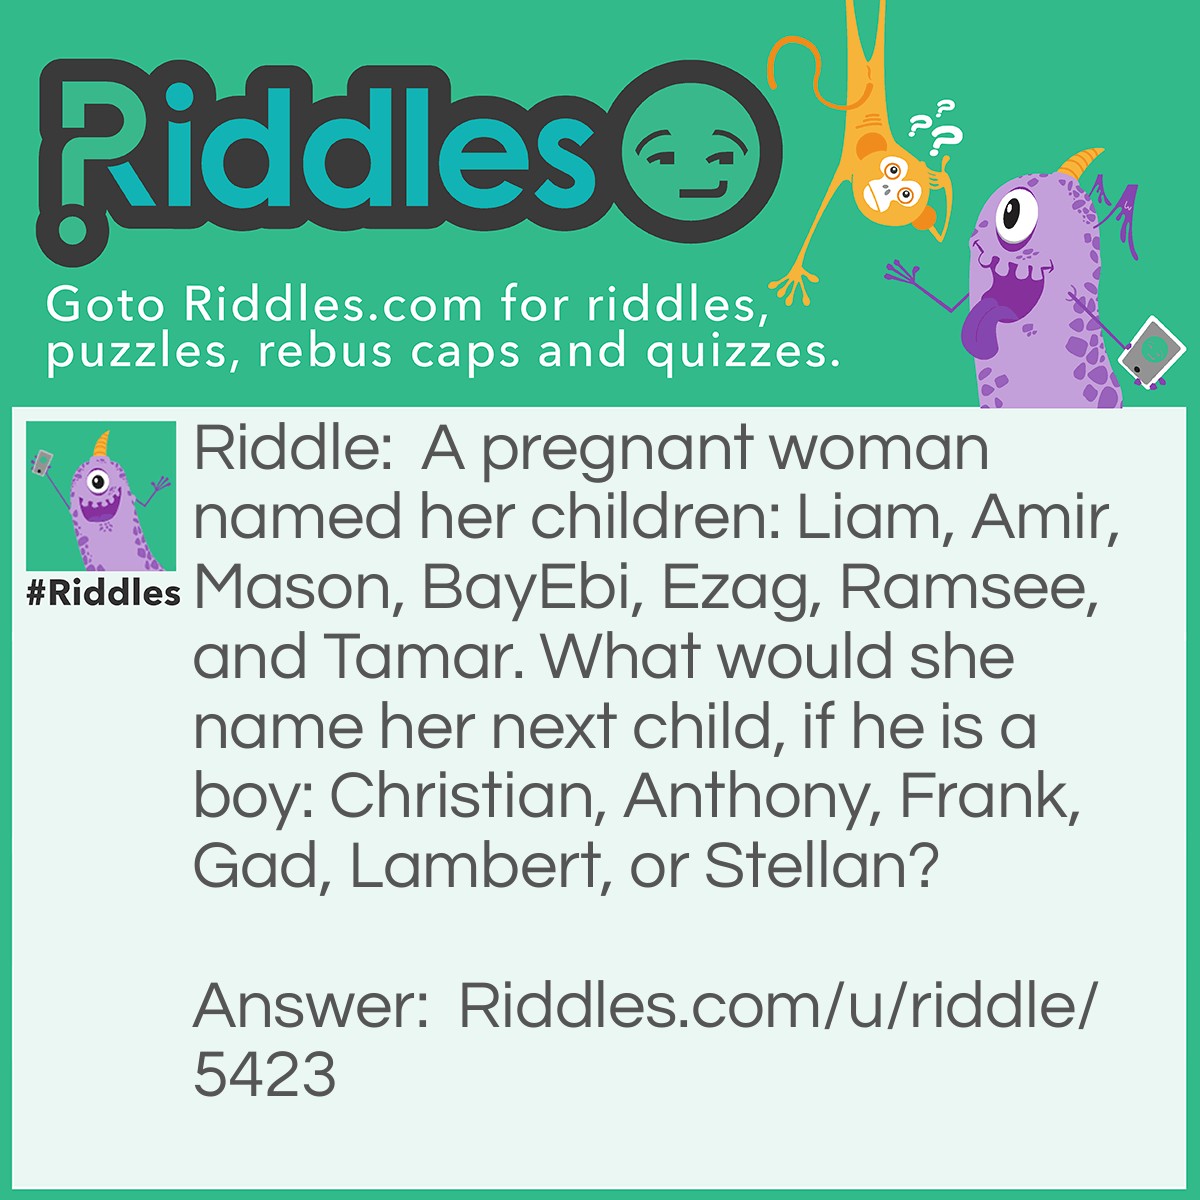 Riddle: A pregnant woman named her children: Liam, Amir, Mason, BayEbi, Ezag, Ramsee, and Tamar. What would she name her next child, if he is a boy: Christian, Anthony, Frank, Gad, Lambert, or Stellan? Answer: Gad. The woman used MR NIGER D to name them. Each name ends with each letter of the acronym.